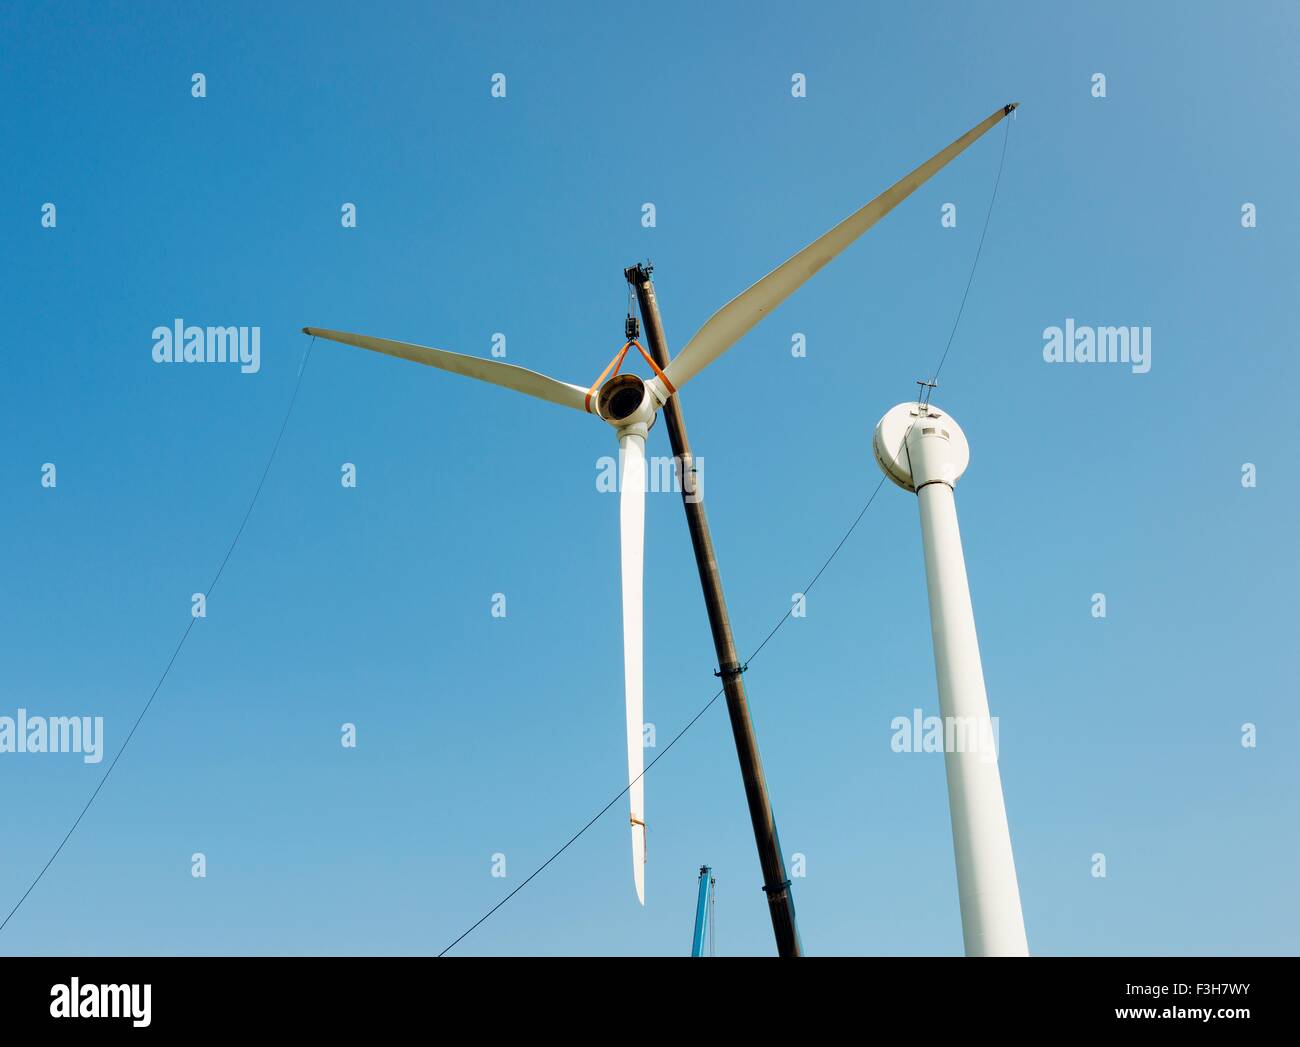 Low angle view of wind turbine being dismantled Stock Photo